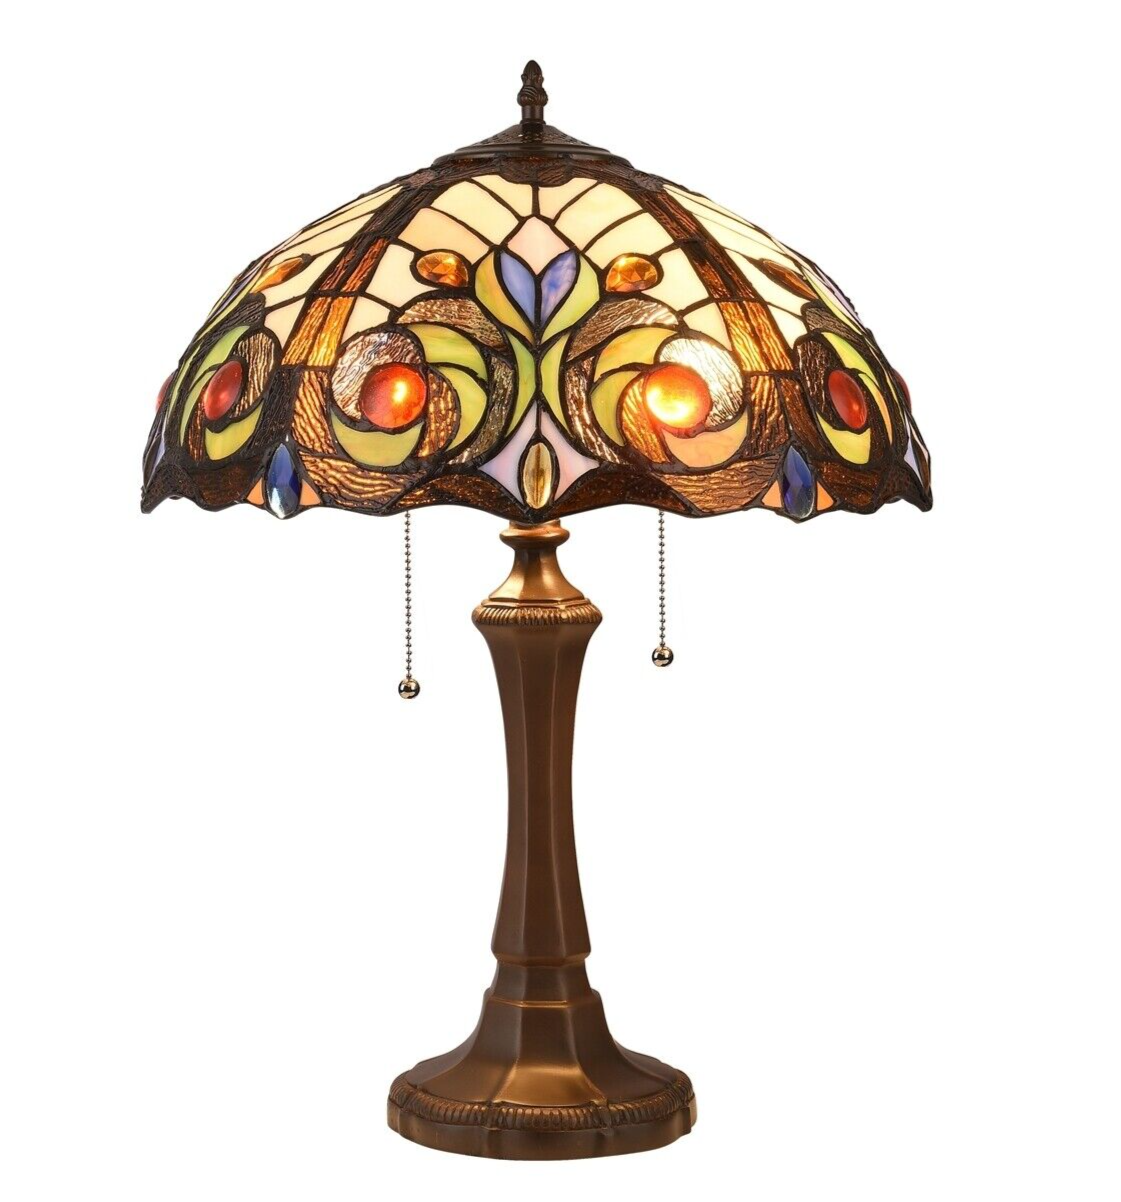 21.9" Antique Style Stained Glass Table Lamp 16.3" Shade